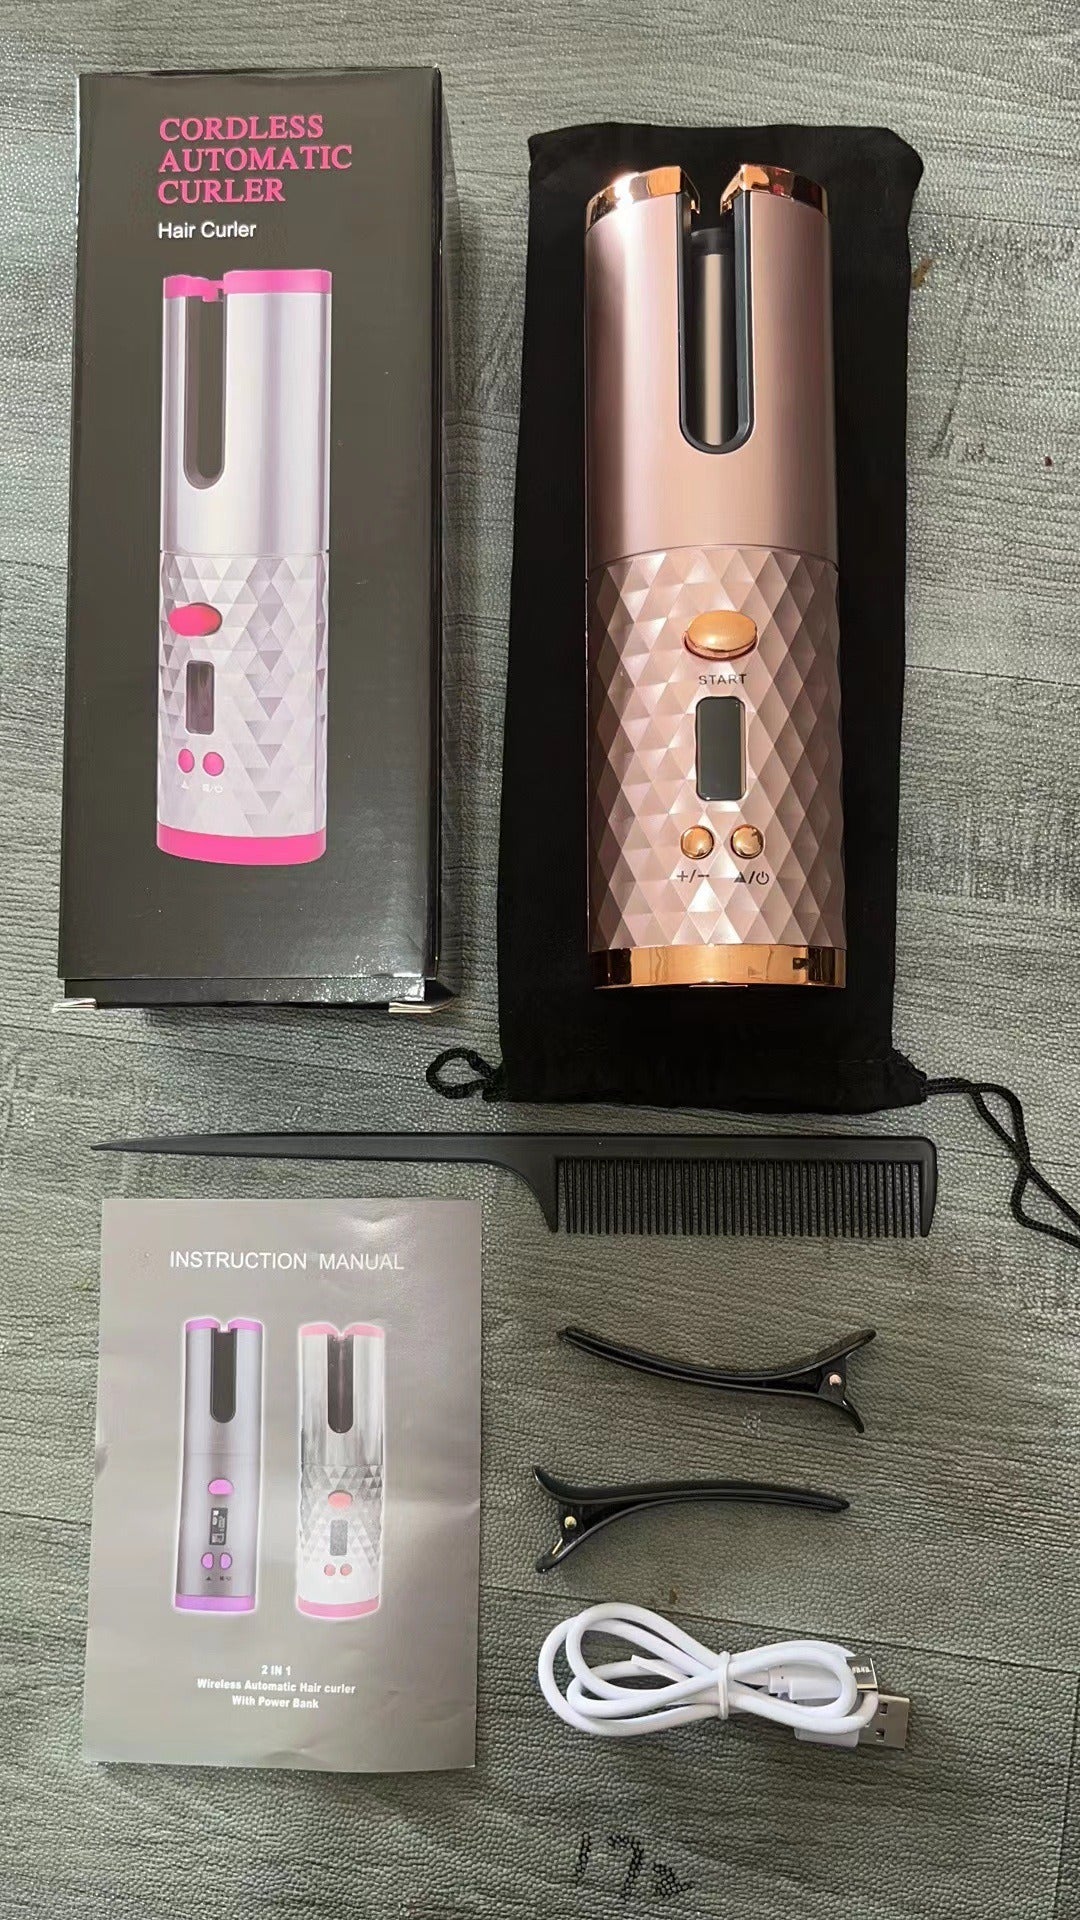 LED Screen Electric Automatic Curling Iron 3000mAh Mini Portable Thermostatic Curling Iron Three Levels Different Volume Electric Curling Iron For Travel And Home Use